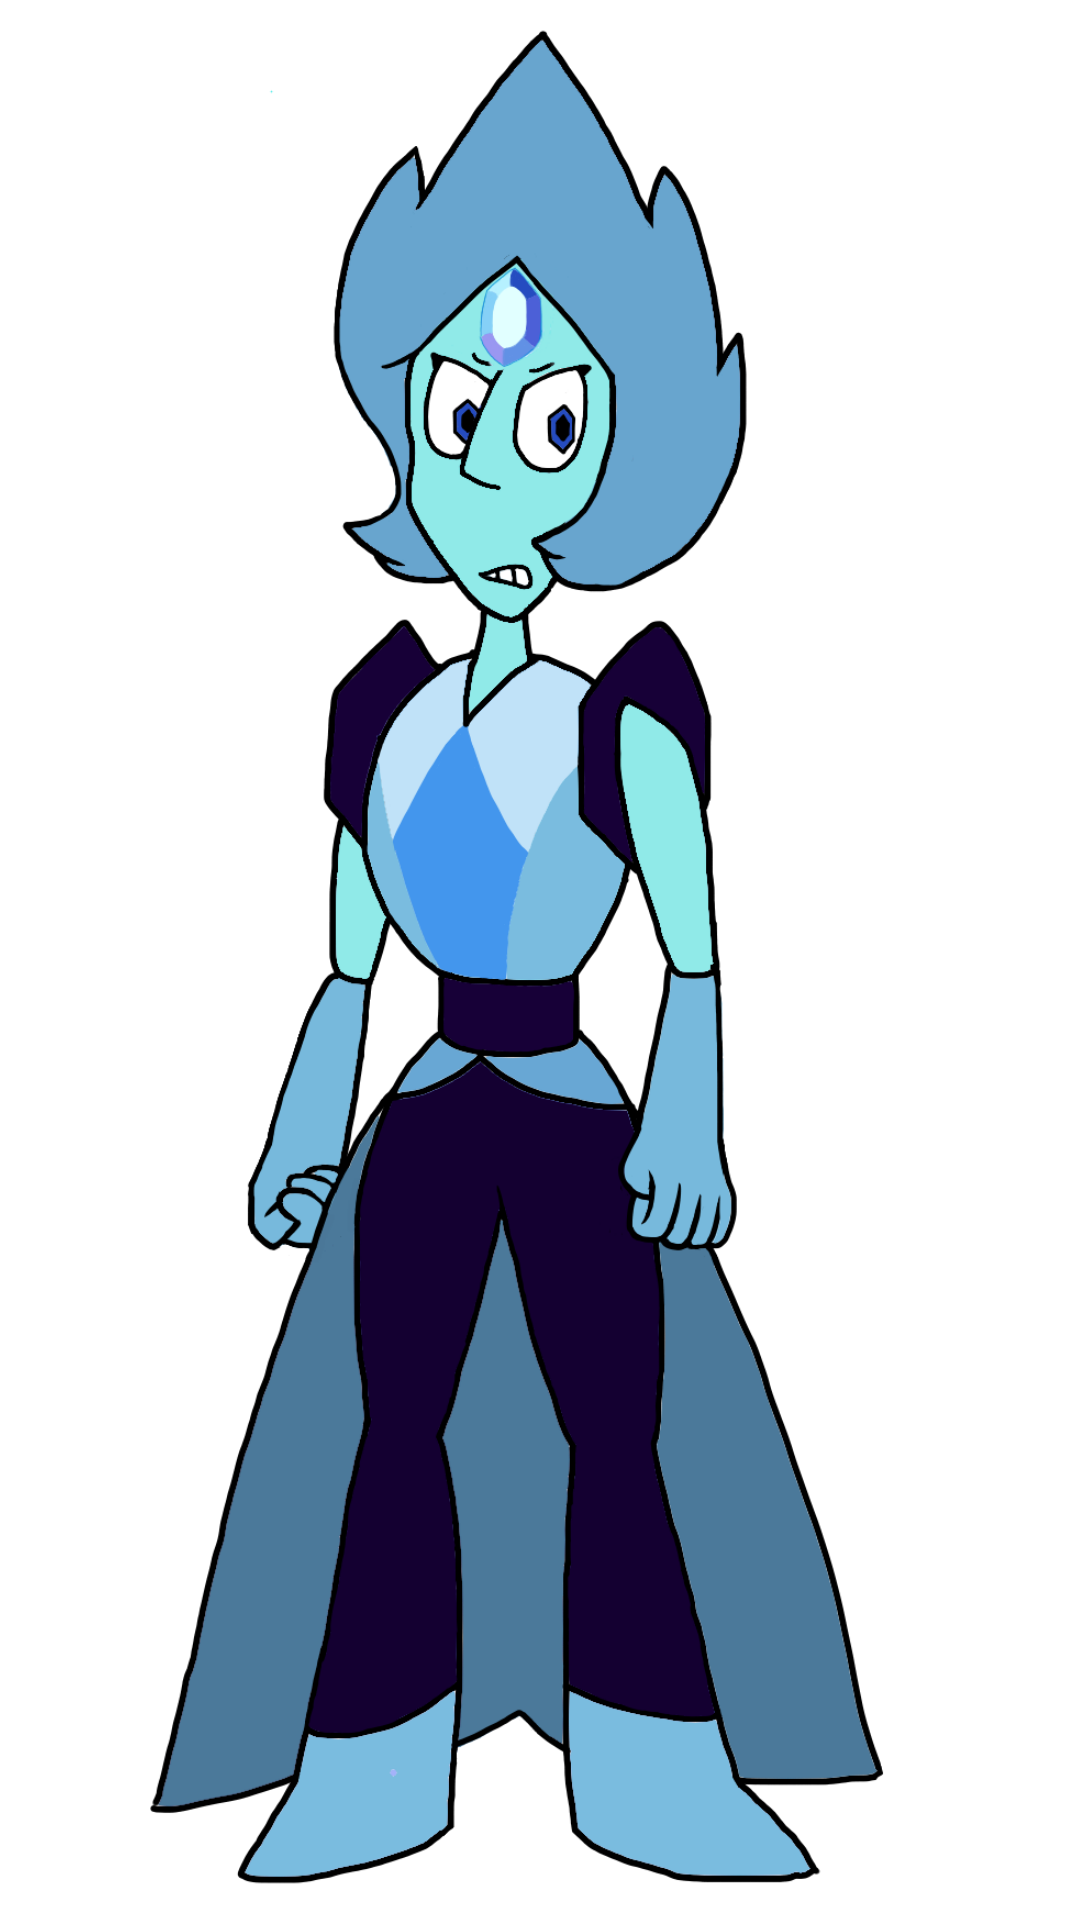 Image - IMG 1176.PNG | Steven Universe Wiki | FANDOM powered by Wikia